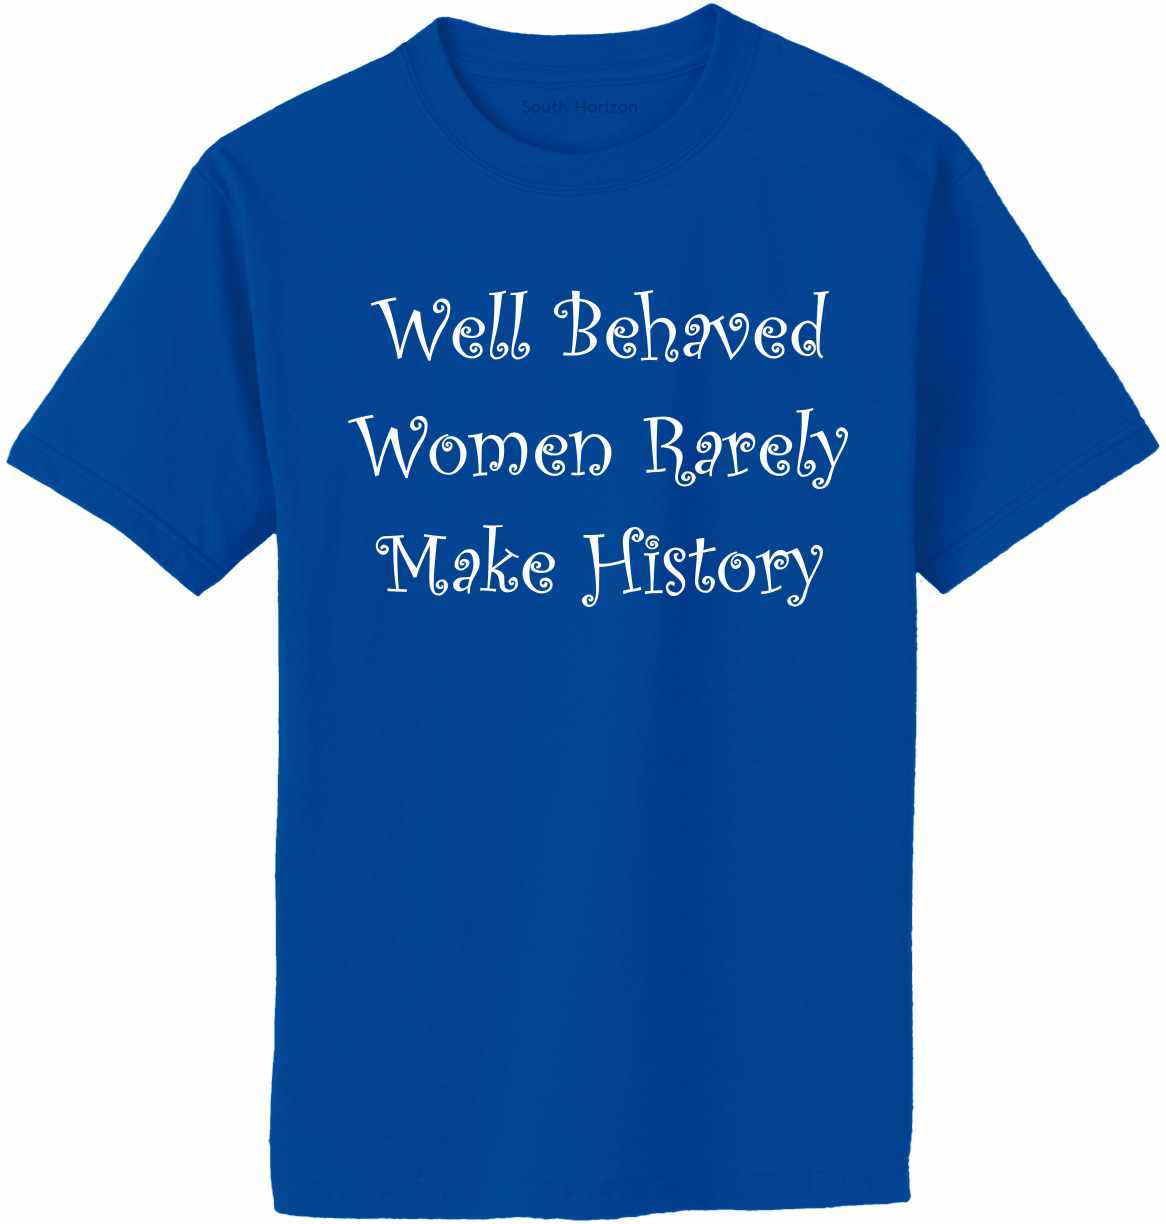 Well Behaved Women Rarely Make History Adult T-Shirt (#487-1)